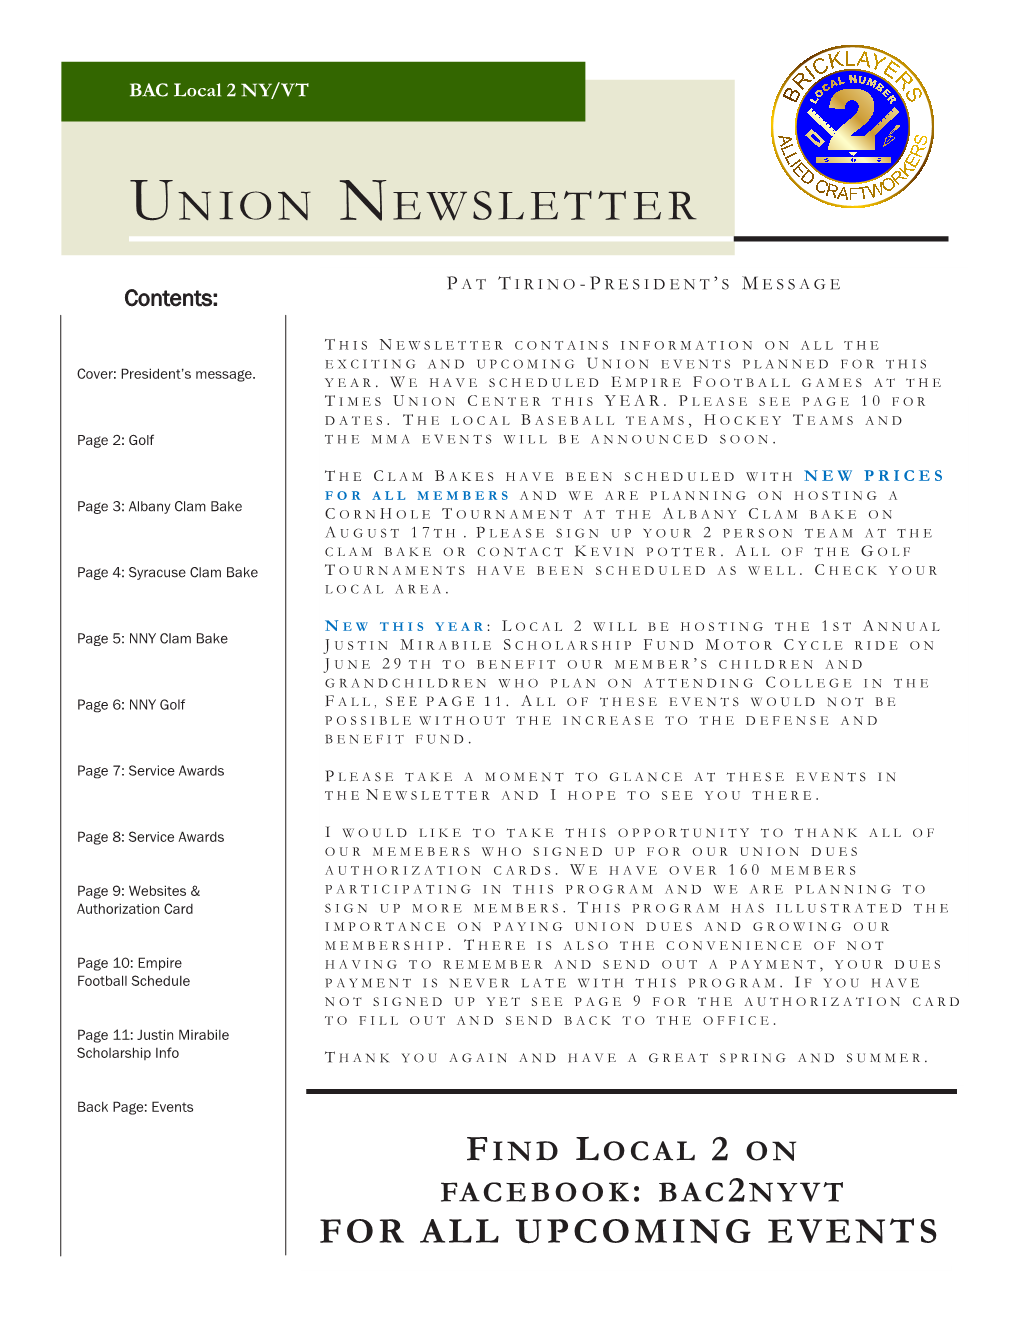 Union Newsletter Page 4 Central New York SYRACUSE Annual Clambake ��� ����